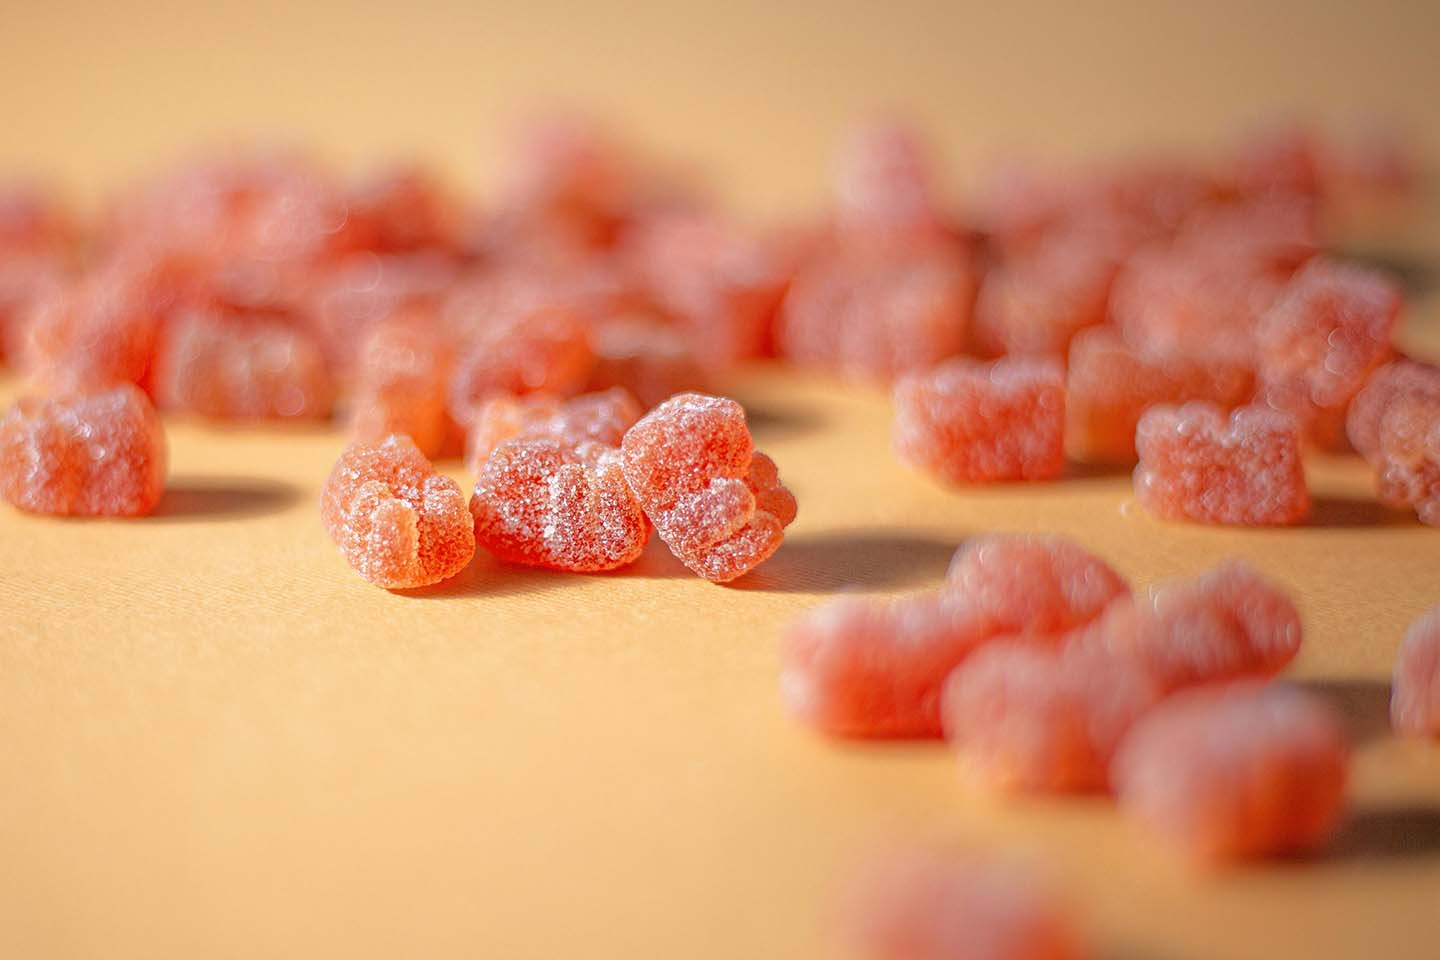 close-up photo of several ored-range gummy bears on a brown surface